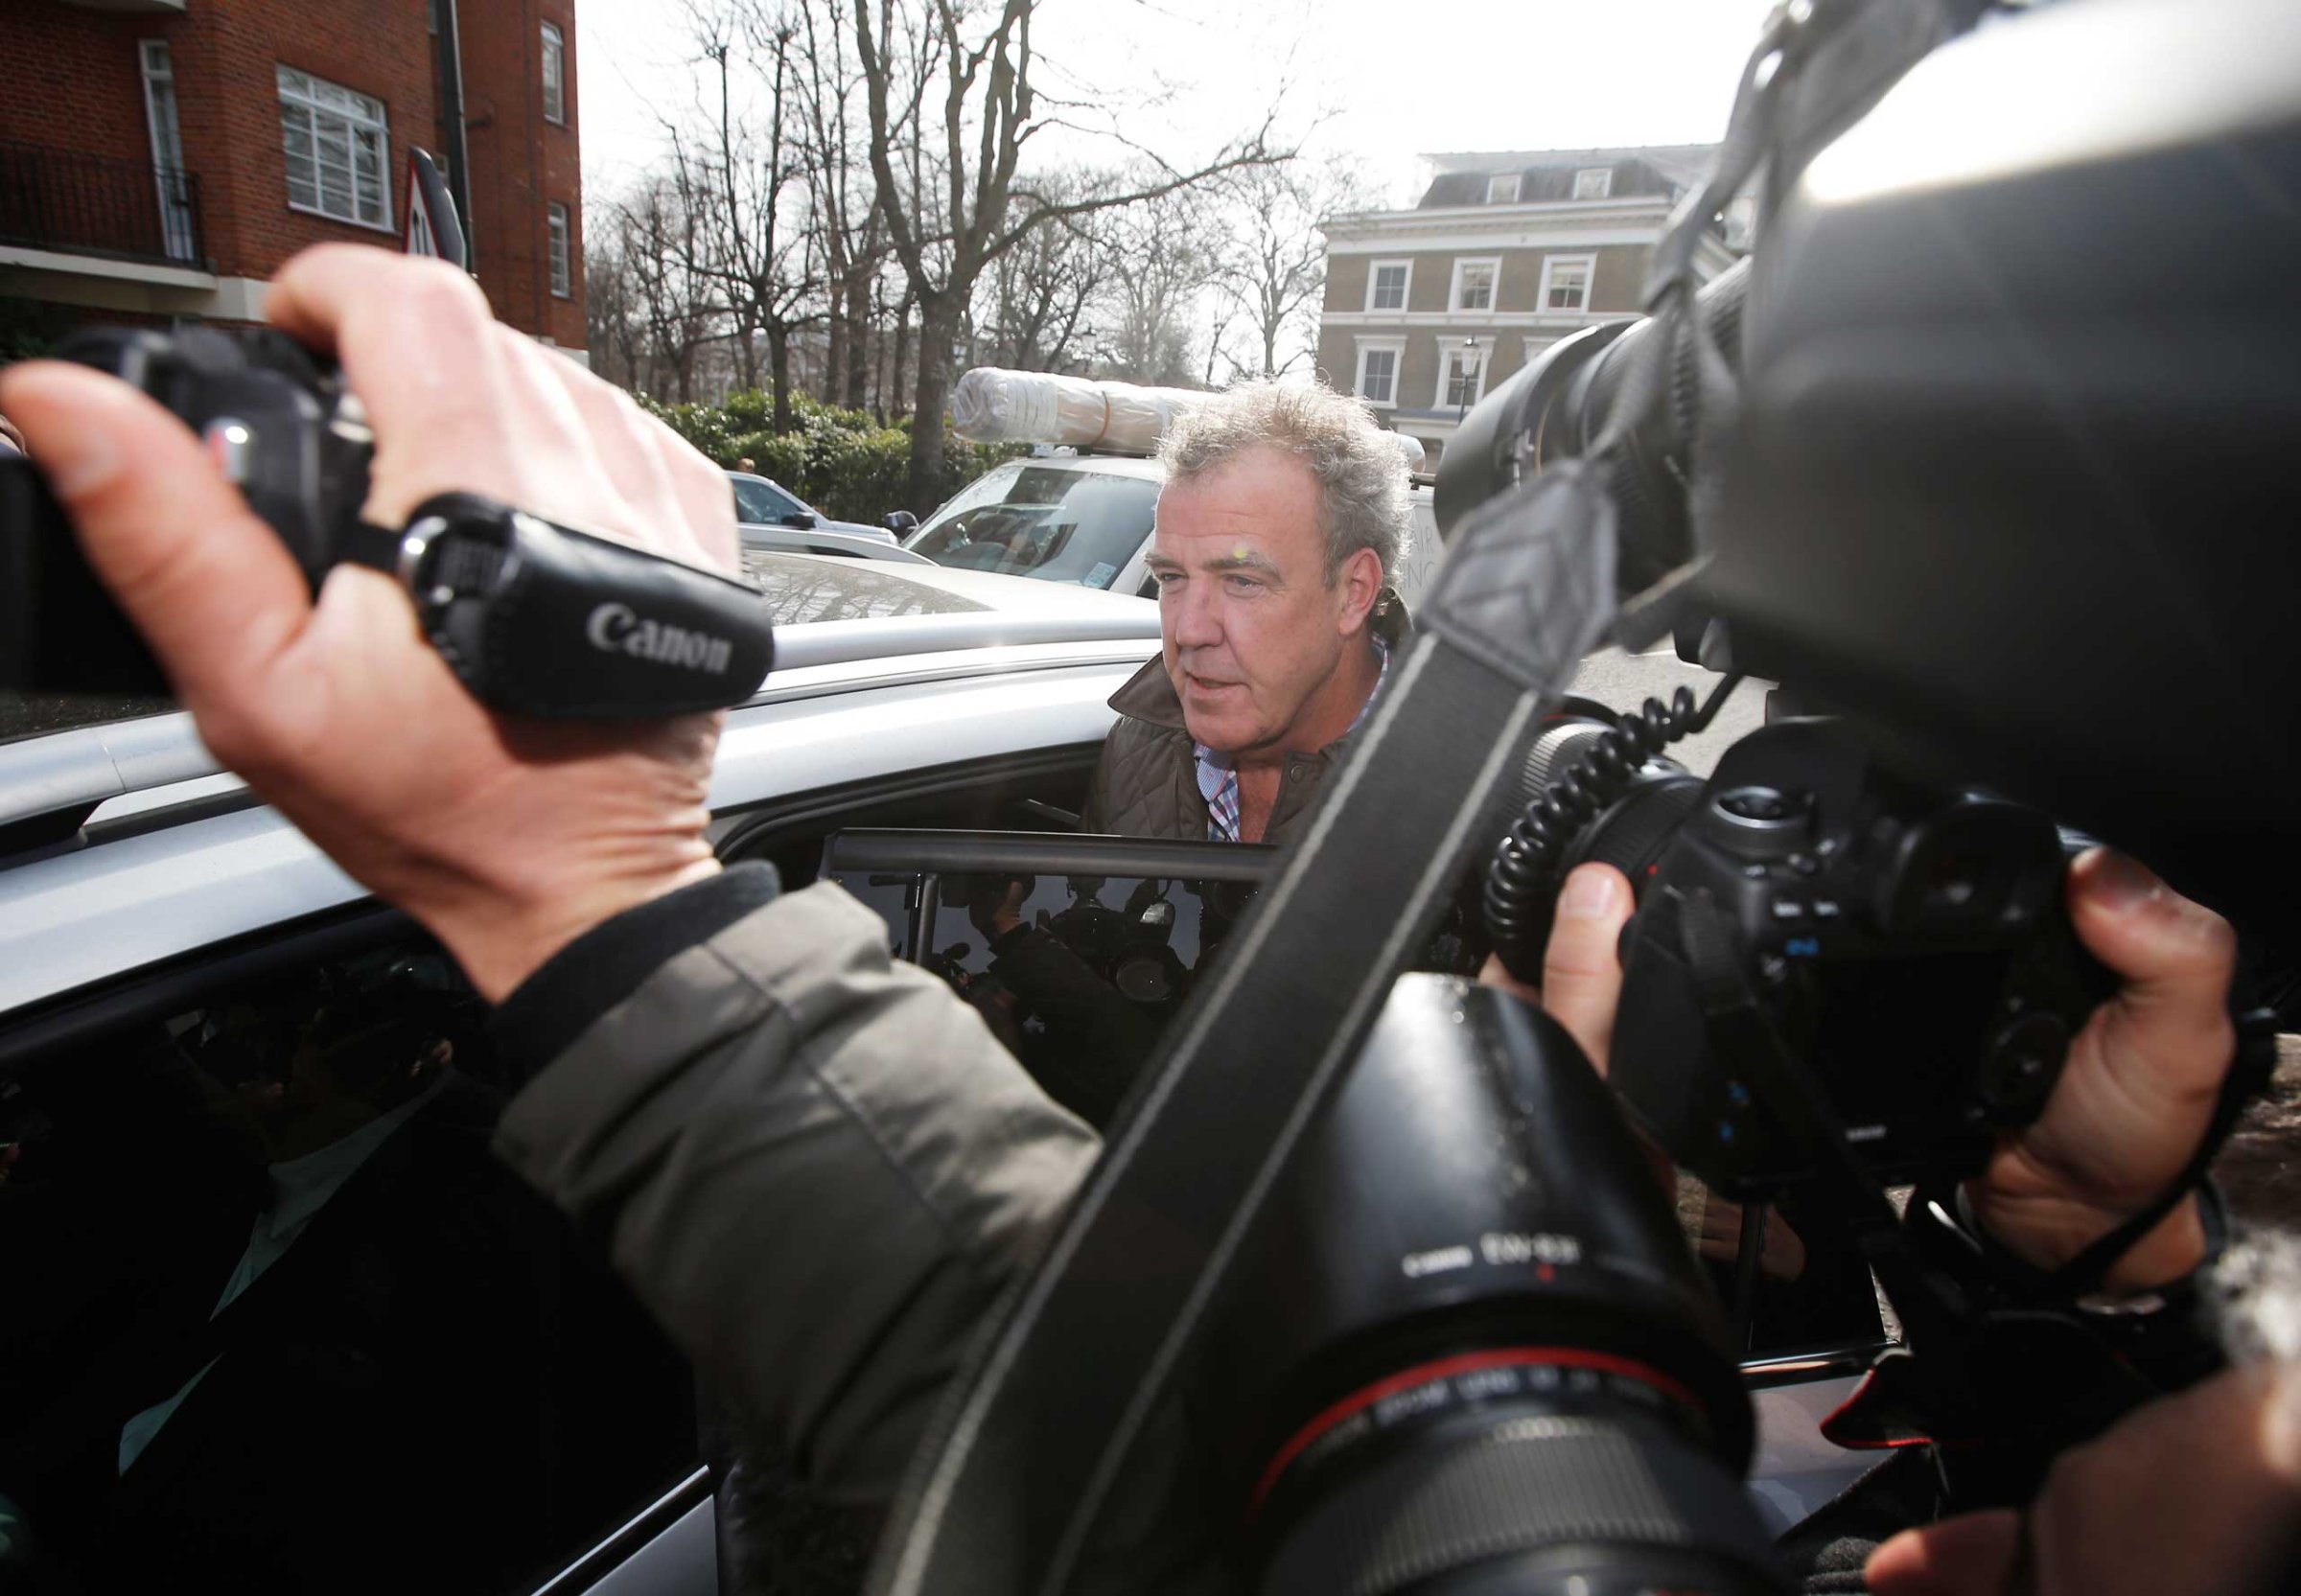 Television presenter Jeremy Clarkson is mobbed by journalists as he leaves an address in London, March 11, 2015.